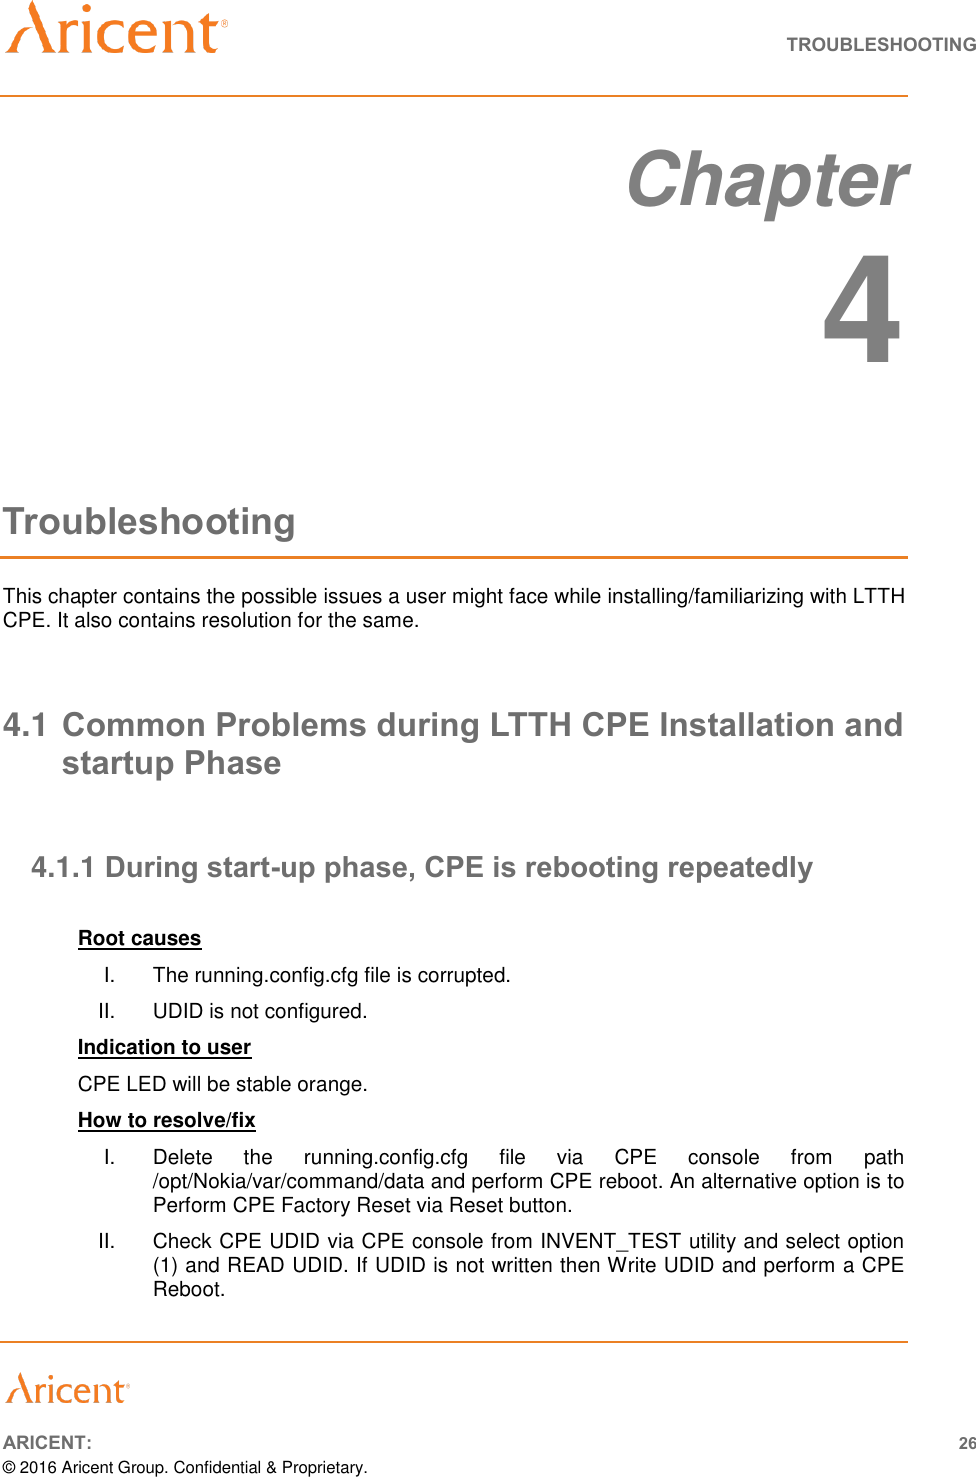   TROUBLESHOOTING       ARICENT: 26 © 2016 Aricent Group. Confidential &amp; Proprietary.   Chapter 4 Troubleshooting This chapter contains the possible issues a user might face while installing/familiarizing with LTTH CPE. It also contains resolution for the same.  4.1 Common Problems during LTTH CPE Installation and startup Phase  4.1.1 During start-up phase, CPE is rebooting repeatedly  Root causes I.  The running.config.cfg file is corrupted.  II.  UDID is not configured. Indication to user CPE LED will be stable orange. How to resolve/fix  I.  Delete  the  running.config.cfg  file  via  CPE  console  from  path /opt/Nokia/var/command/data and perform CPE reboot. An alternative option is to Perform CPE Factory Reset via Reset button. II.  Check CPE UDID via CPE console from INVENT_TEST utility and select option (1) and READ UDID. If UDID is not written then Write UDID and perform a CPE Reboot.  